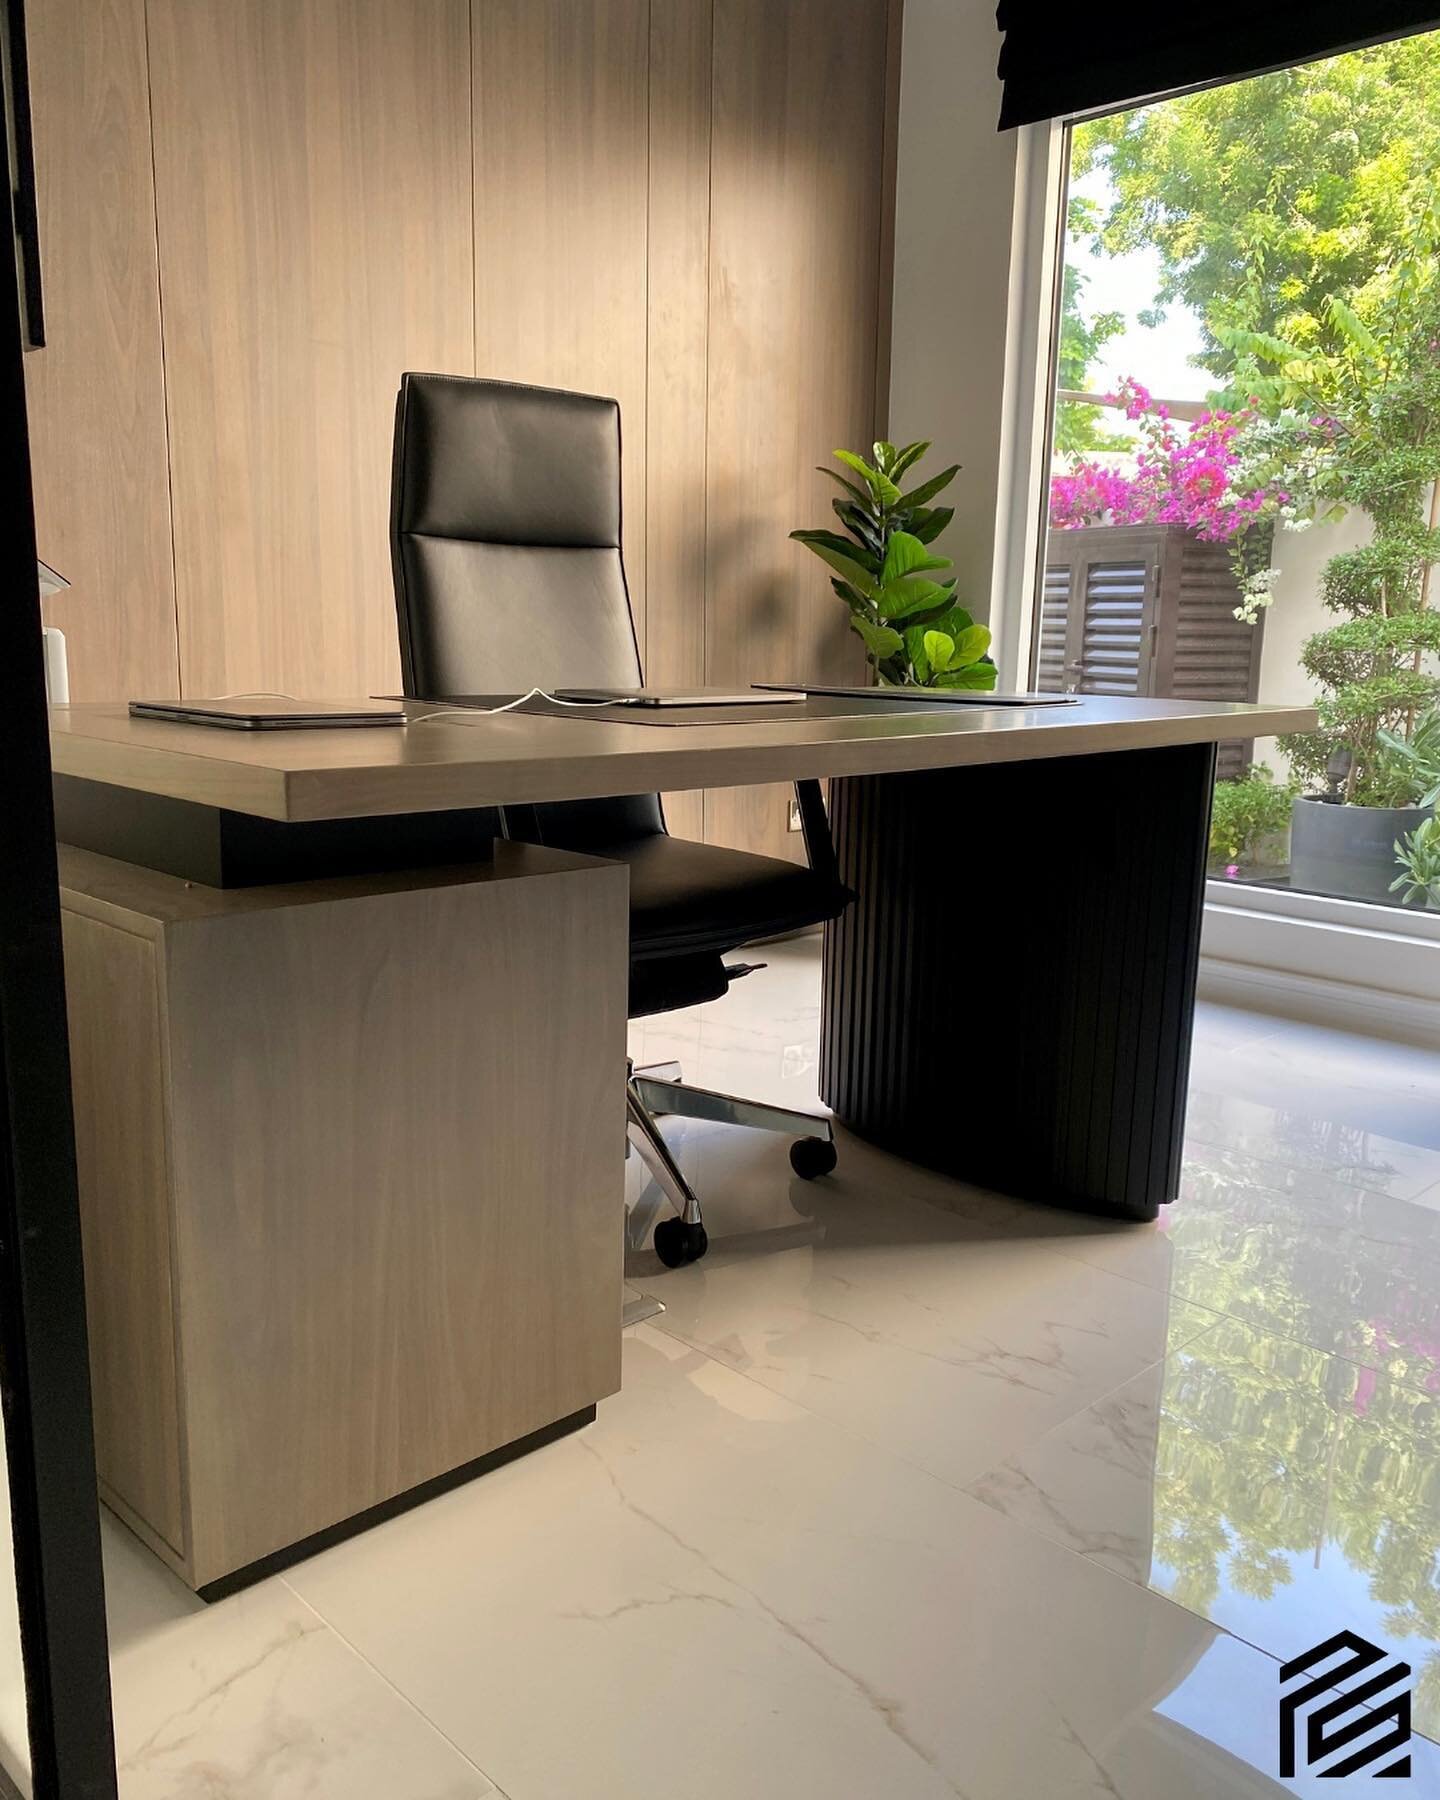 🖥️ A dedicated work space at home helps you set aside household distractions and focus on your tasks 

👨&zwj;💻This home office features a bespoke desk with cable management and side storage

🖥️The room also features a customised TV unit with stor